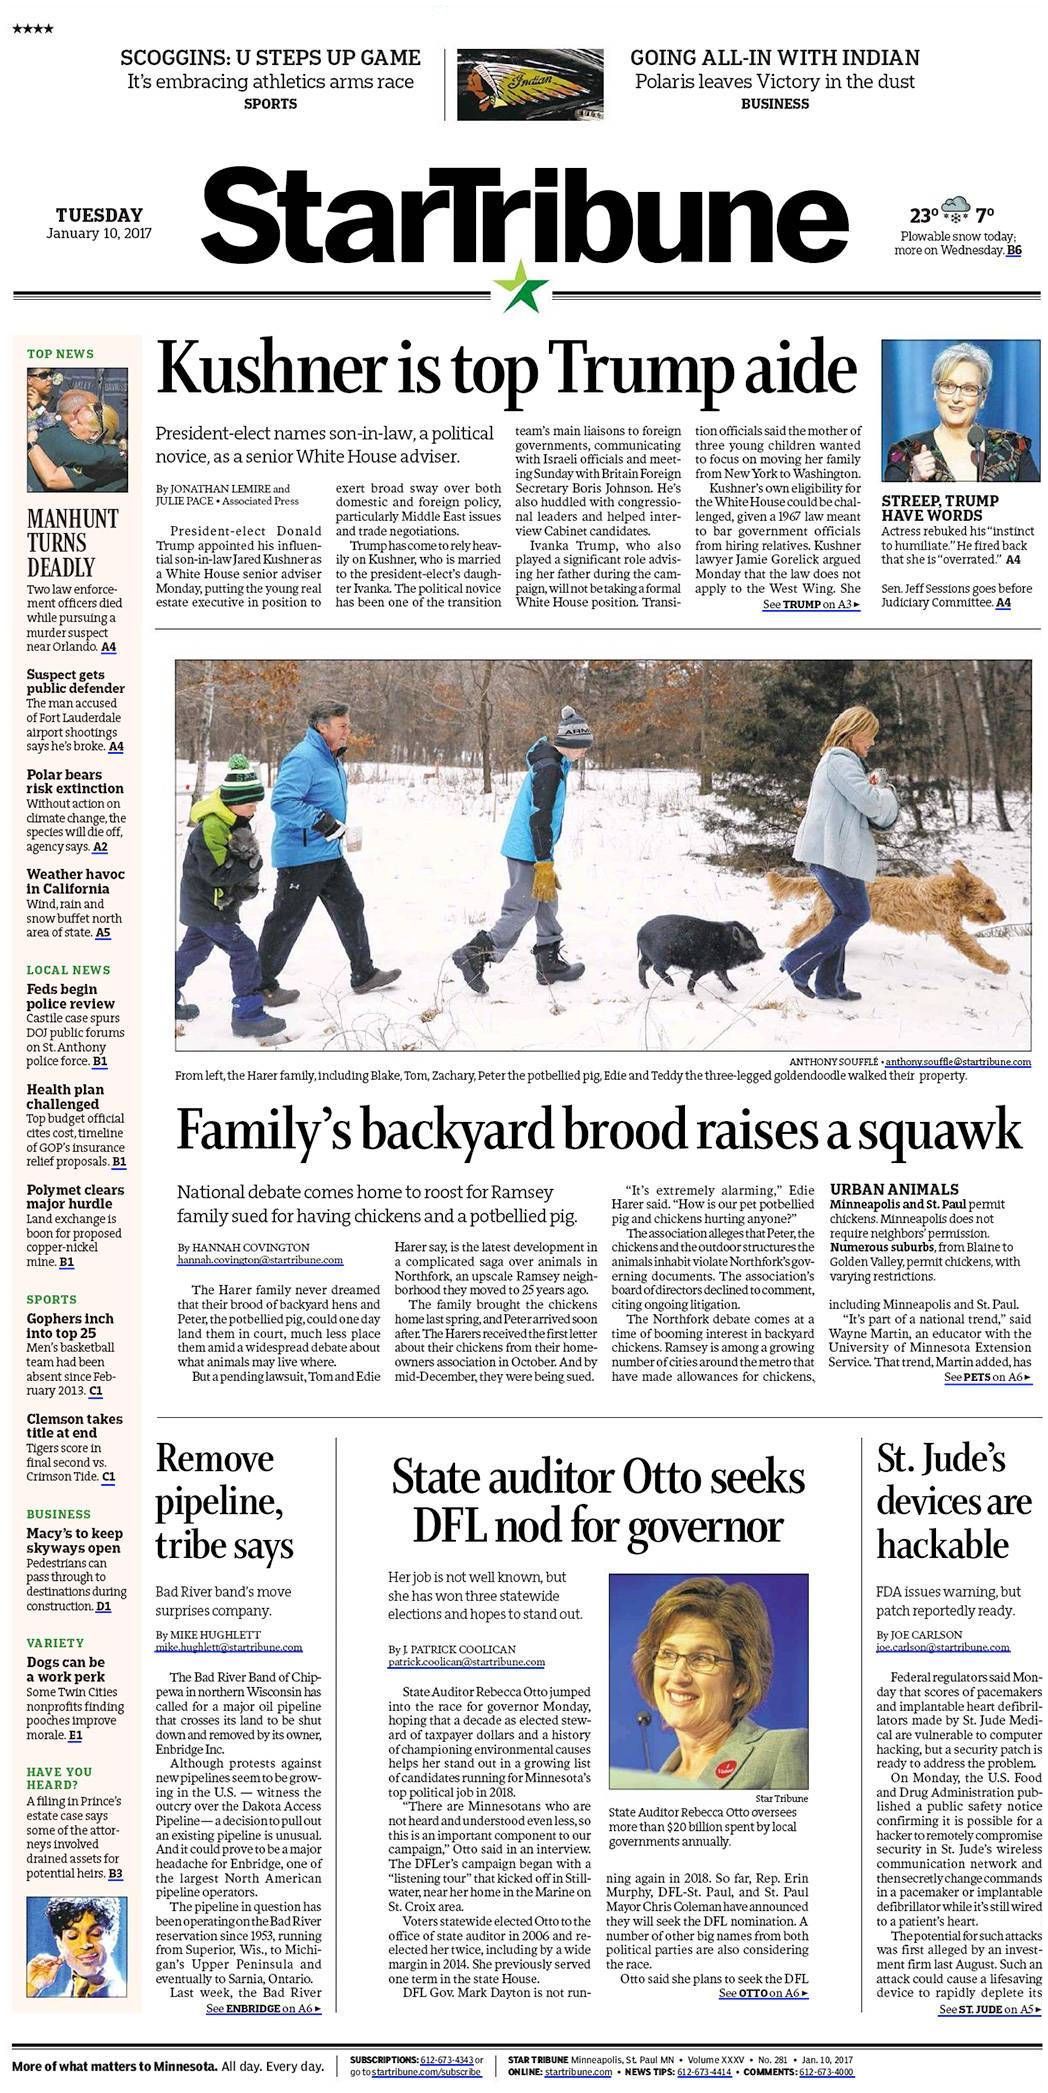 Star Tribune 10 01 2017 front page headline stories Newspaper Front Pages Top